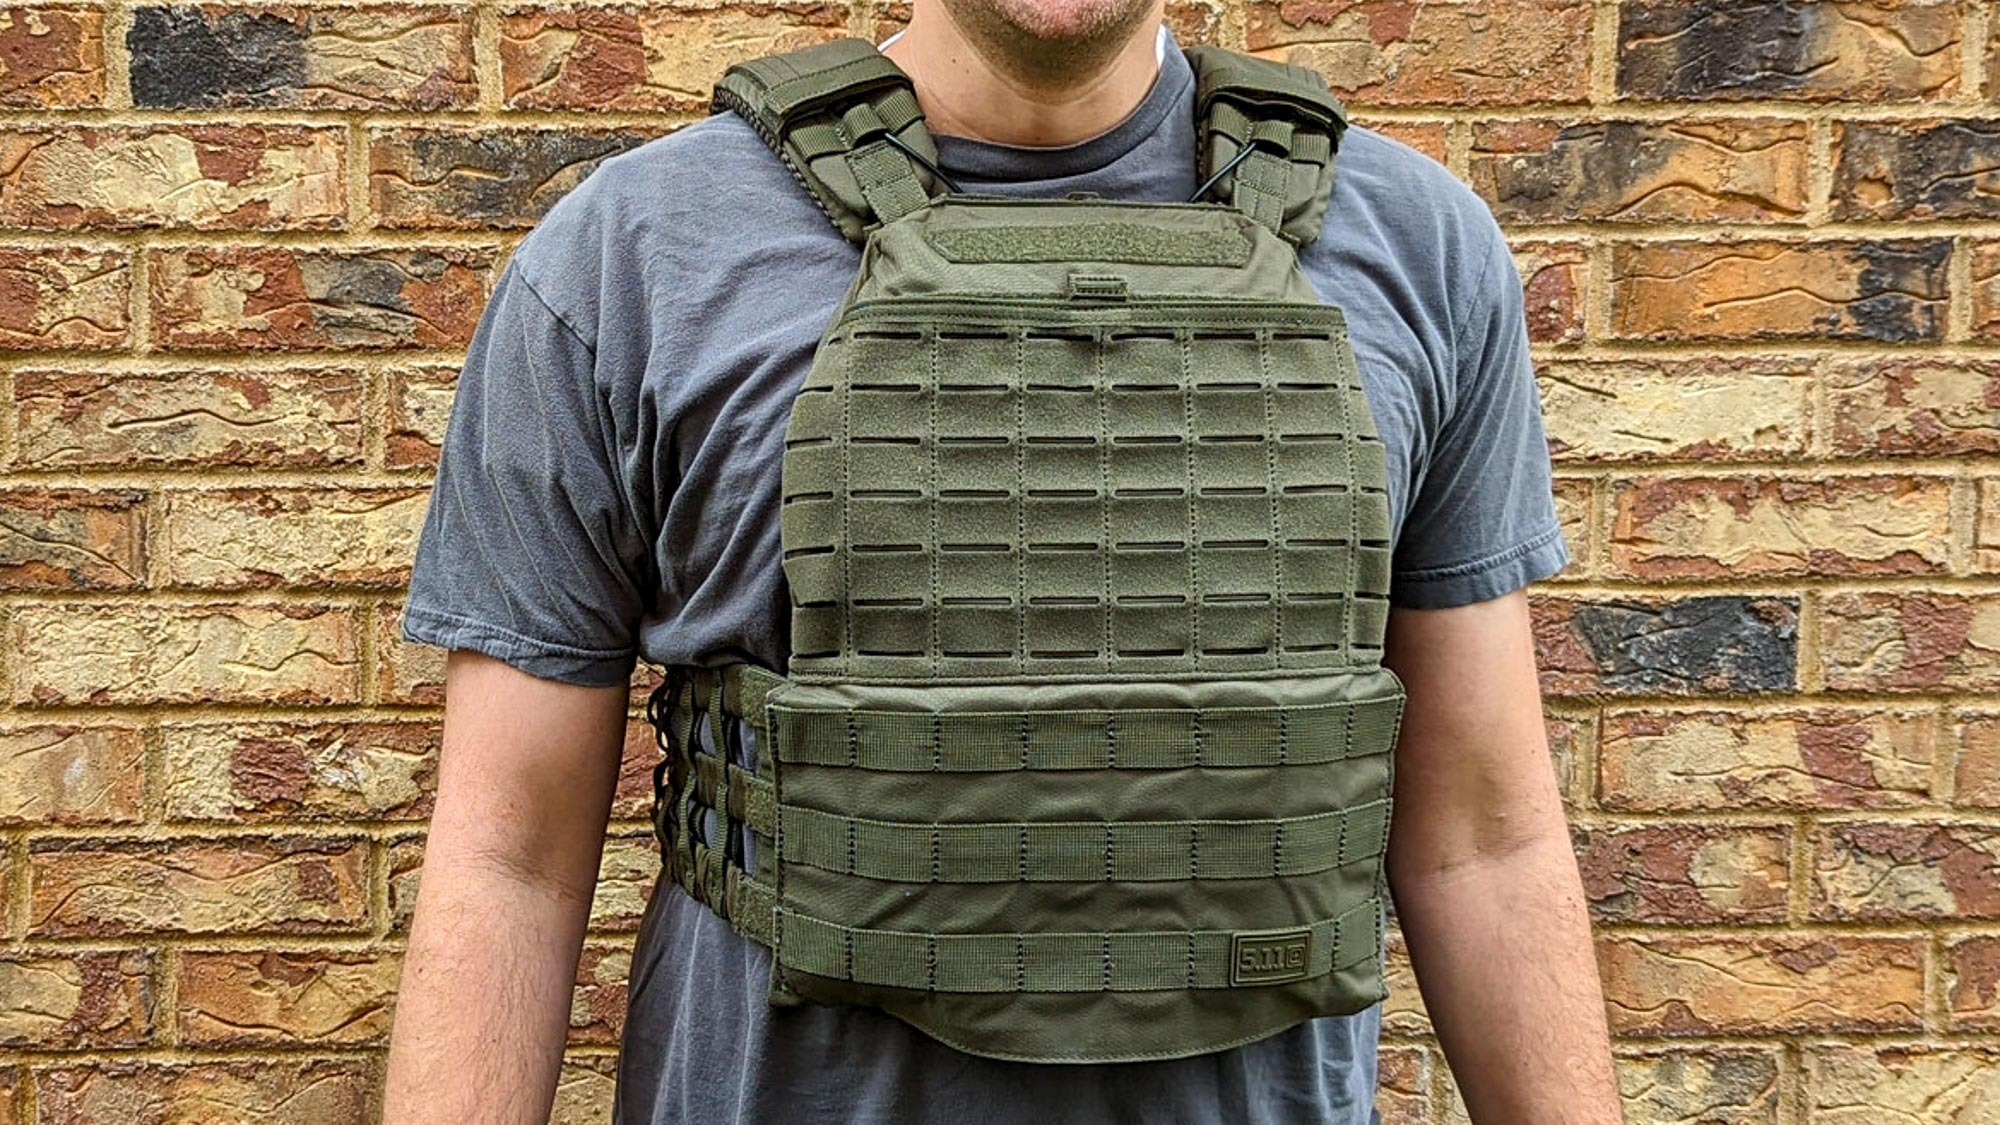 16 Best Weighted Vests for Resistance Training at Home 2024